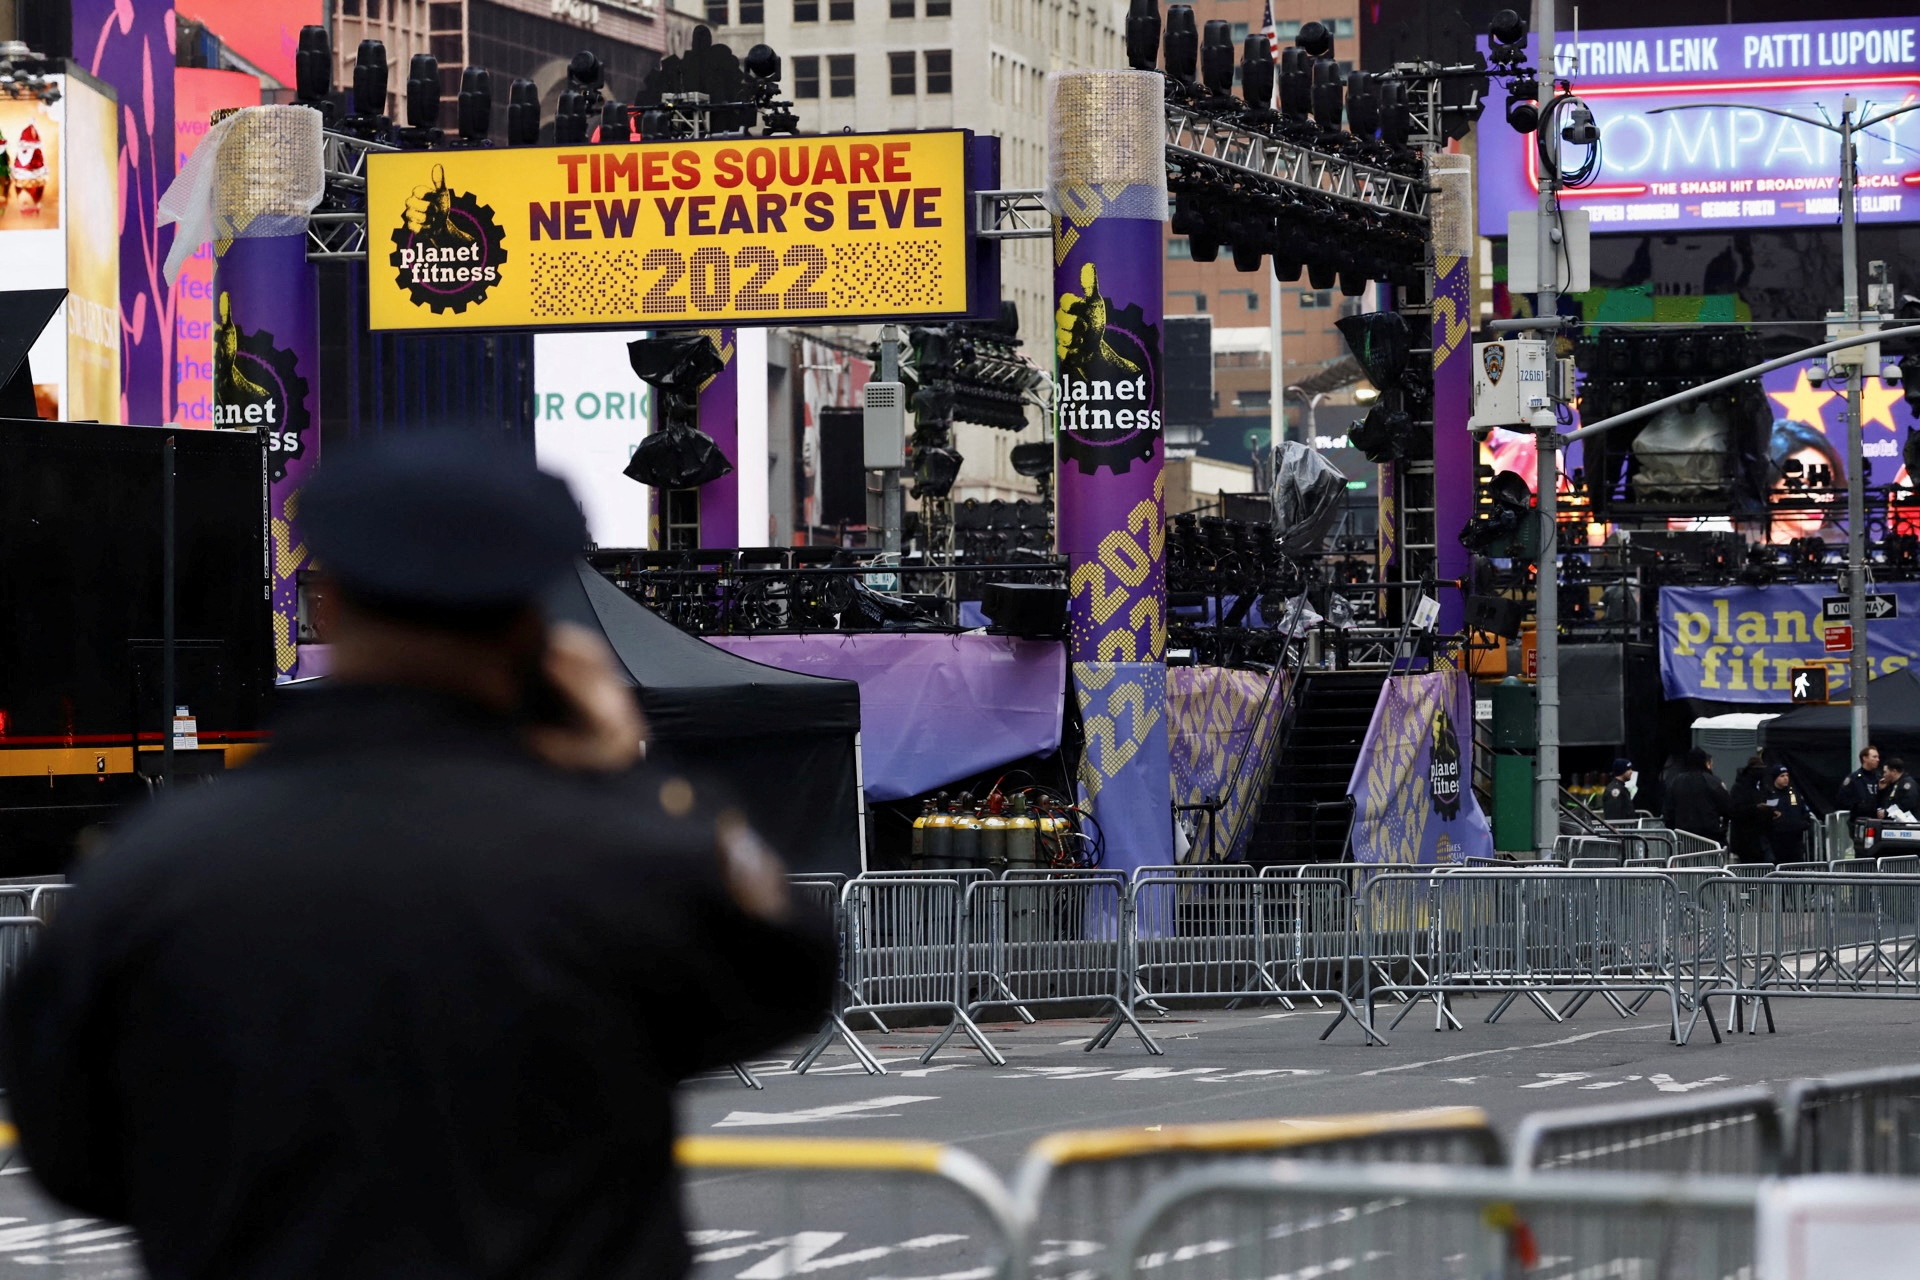 An officer from the New York City Police Department (NYPD) stands guard at Times Square ahead of New Year's Eve celebrations as the Omicron variant continues to spread in the Manhattan borough of New York City, U.S., December 31, 2021. REUTERS/Stefan Jeremiah